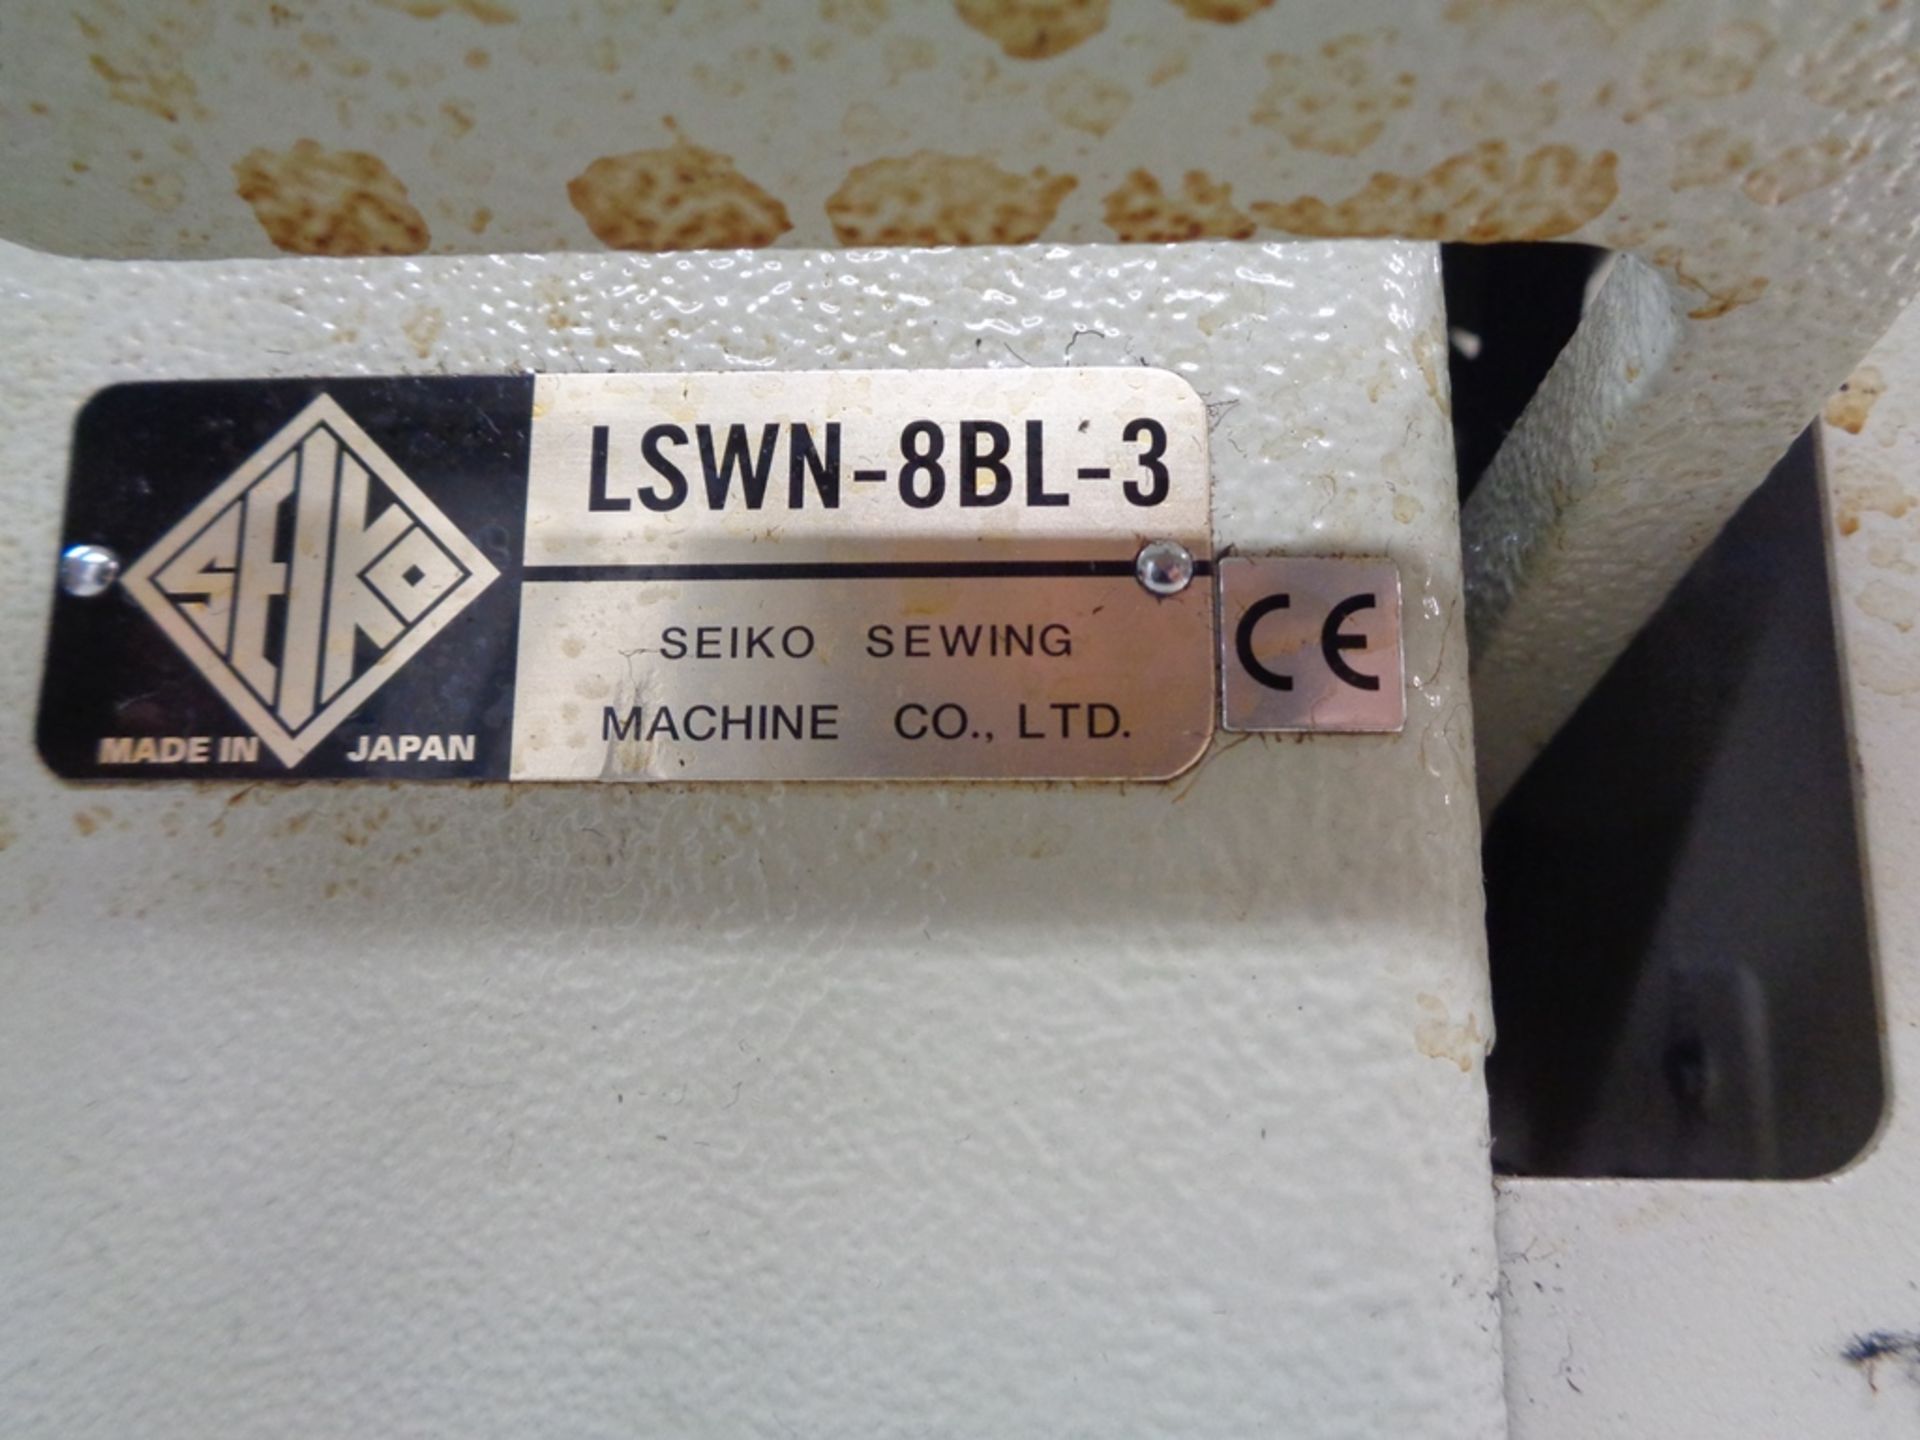 Seiko LSWN-8BL-3 high speed lockstitch sewing machine, with walking foot - Image 3 of 5